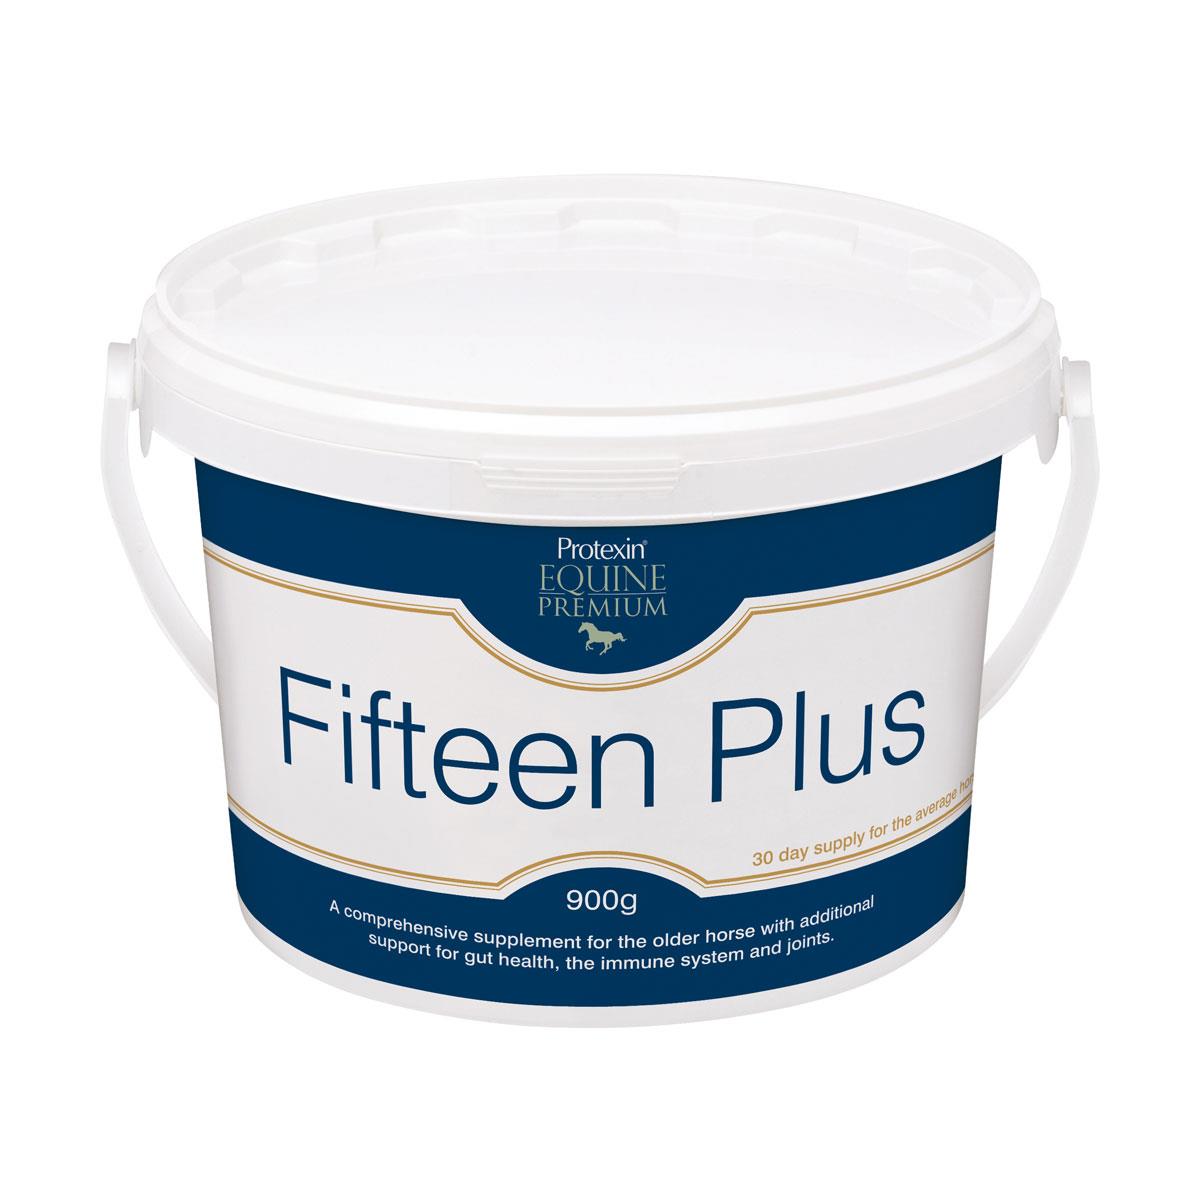 Protexin Fifteen Plus - comprehensive supplement for older horses, supporting gut health, joints, and immune function.